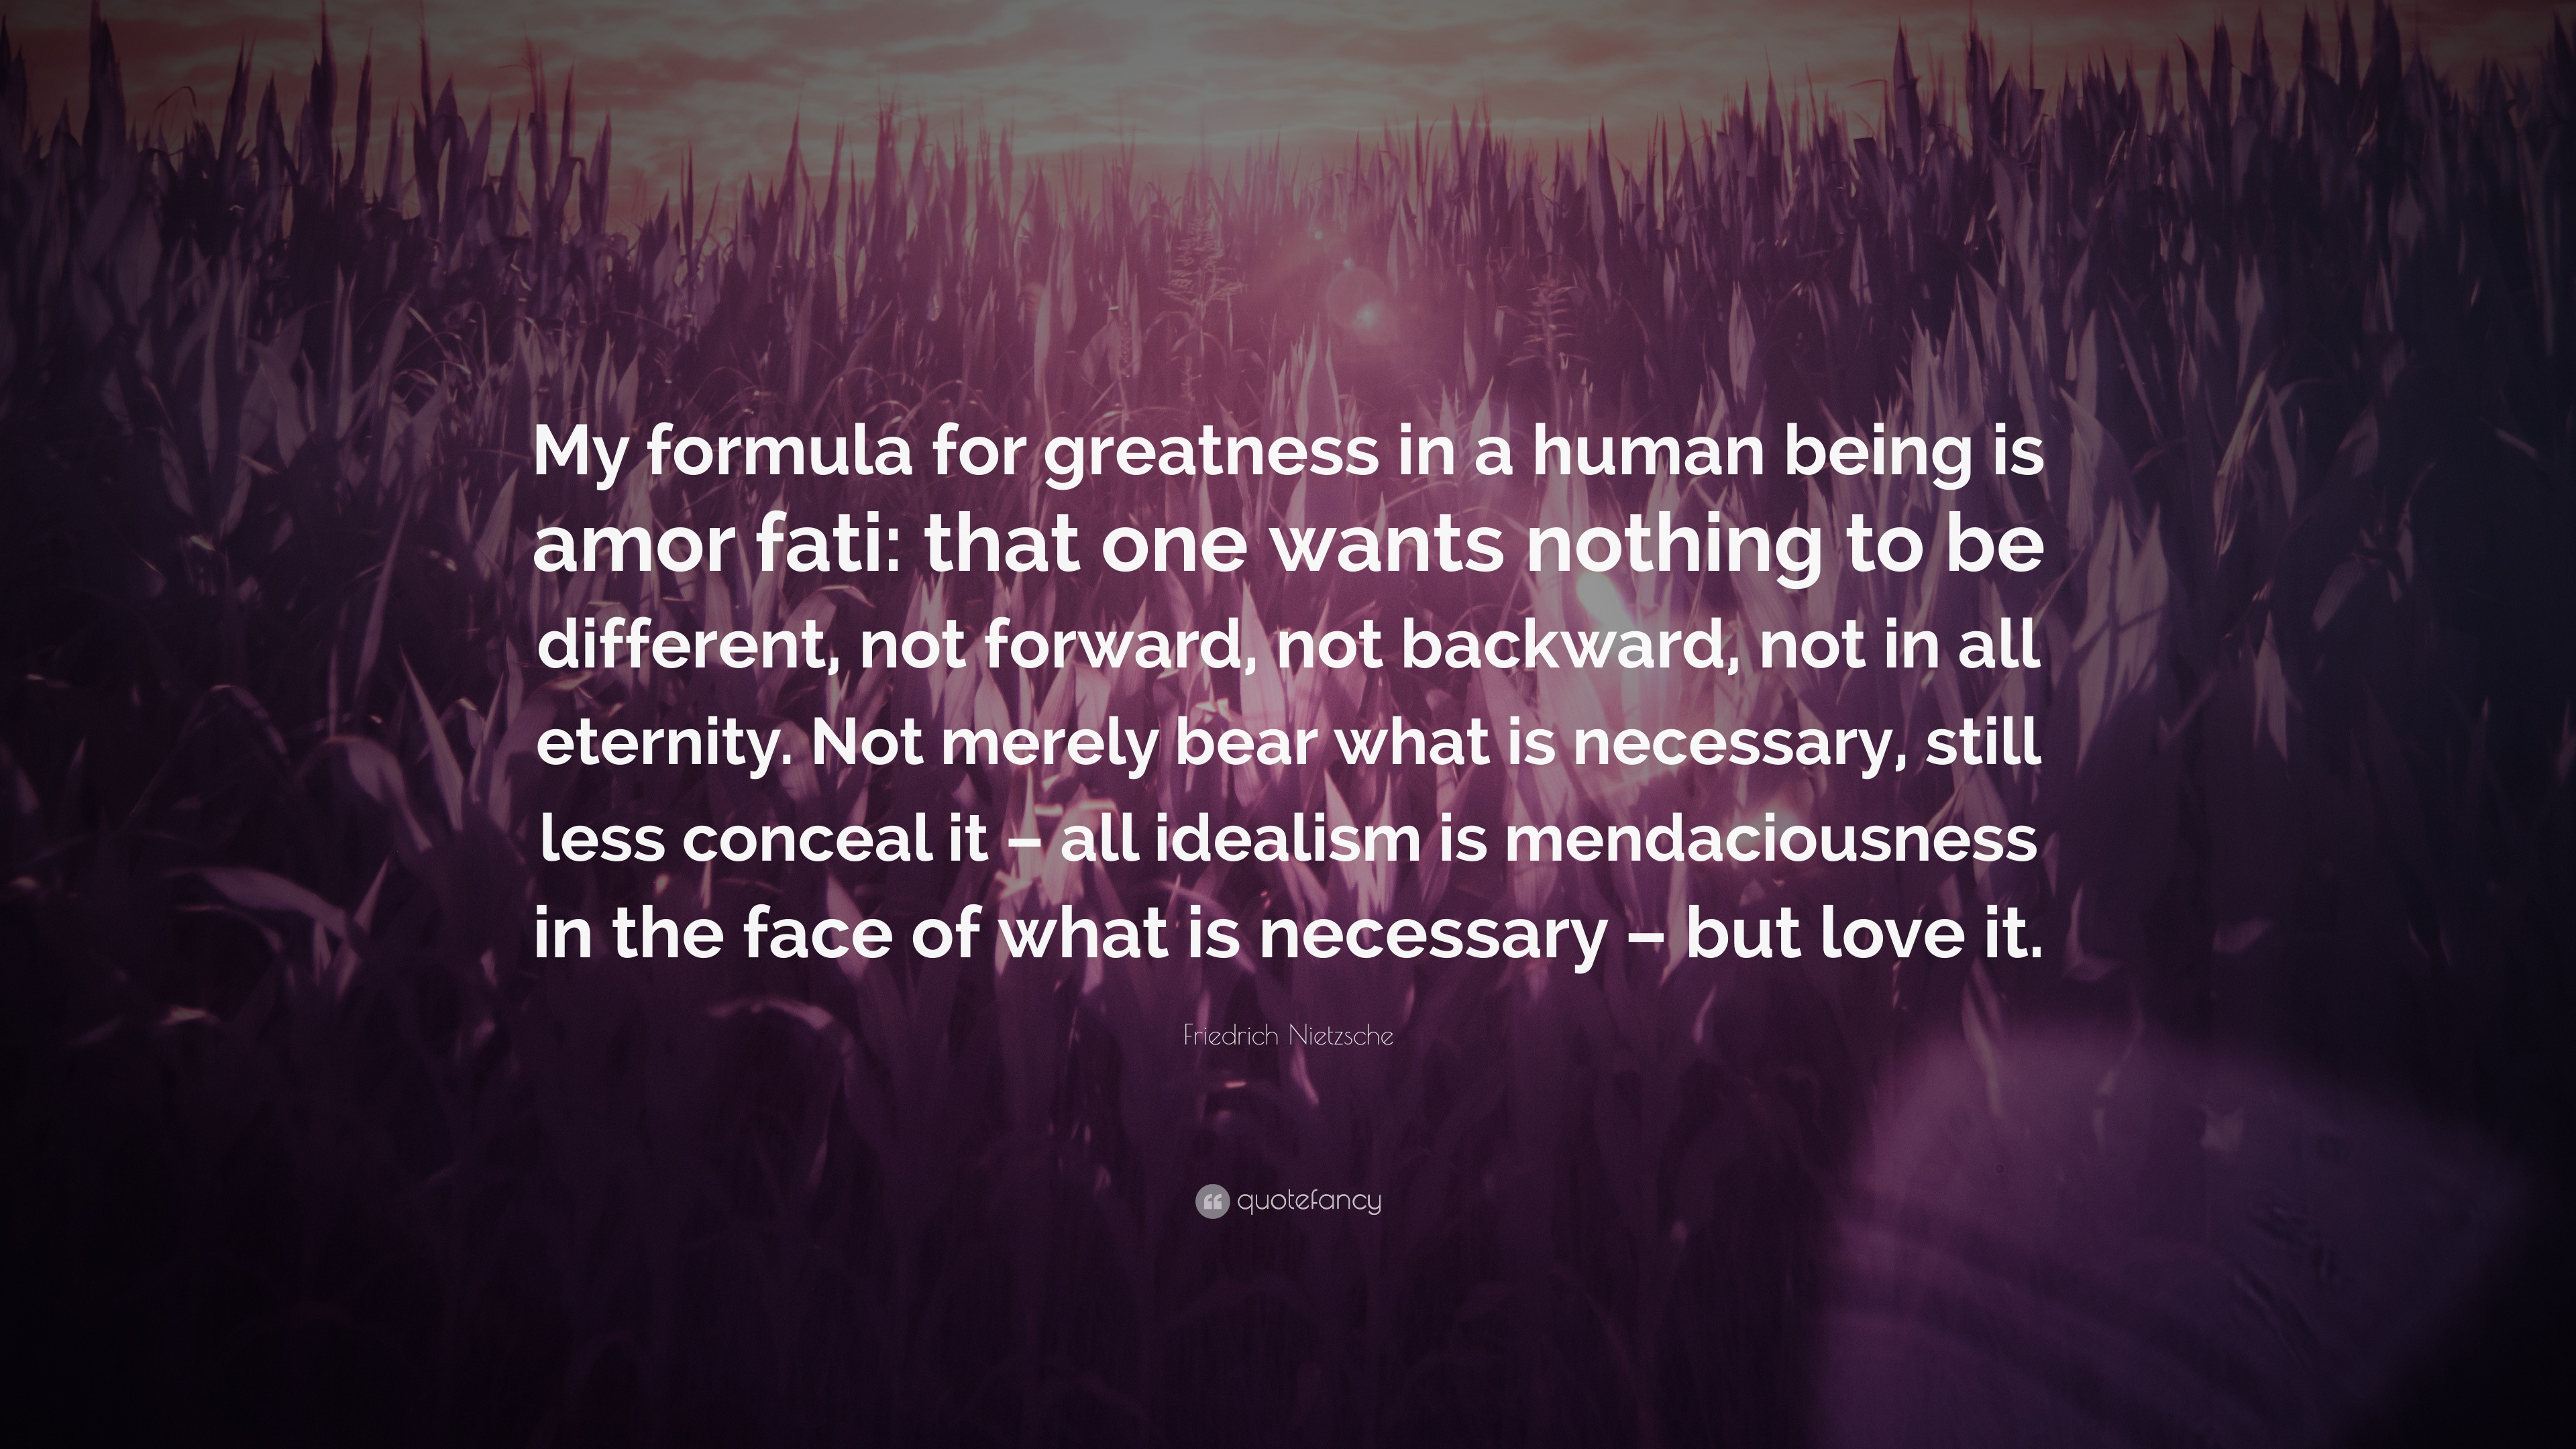 Friedrich Nietzsche Quote: “My formula for greatness in a human being